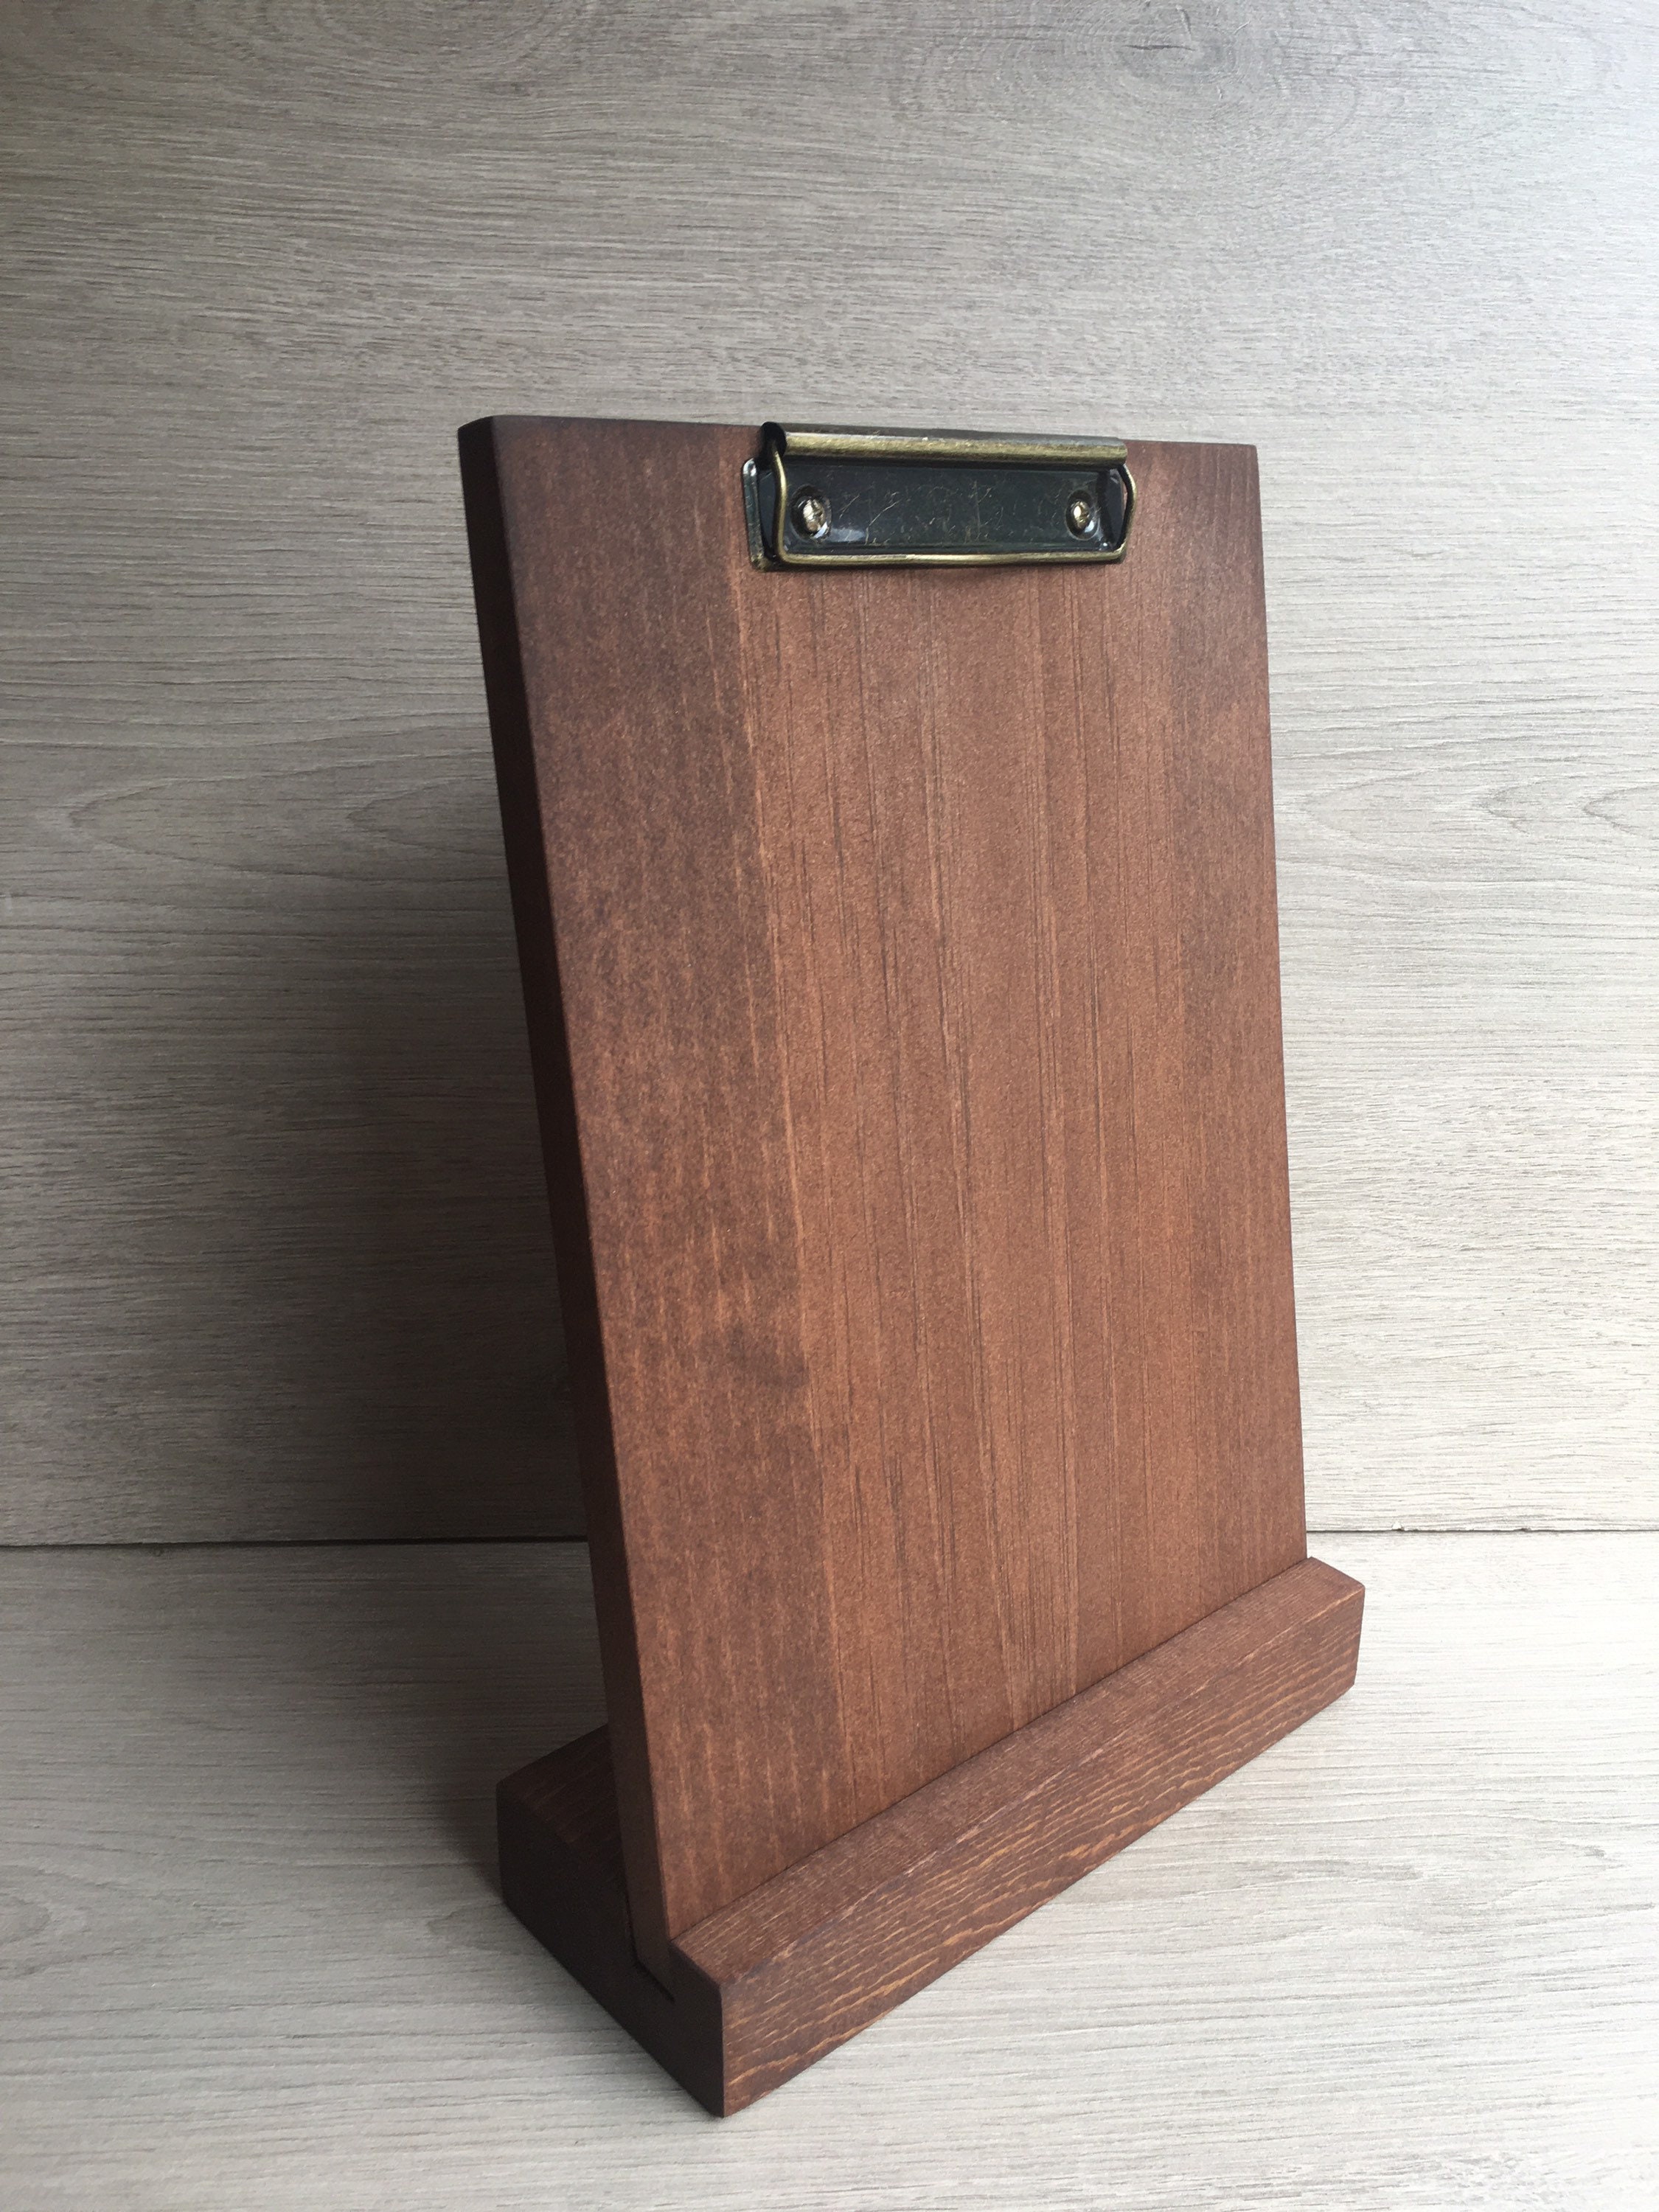 Wood Clipboard Legal-size 9.5 X 16 Personalized Hardwood